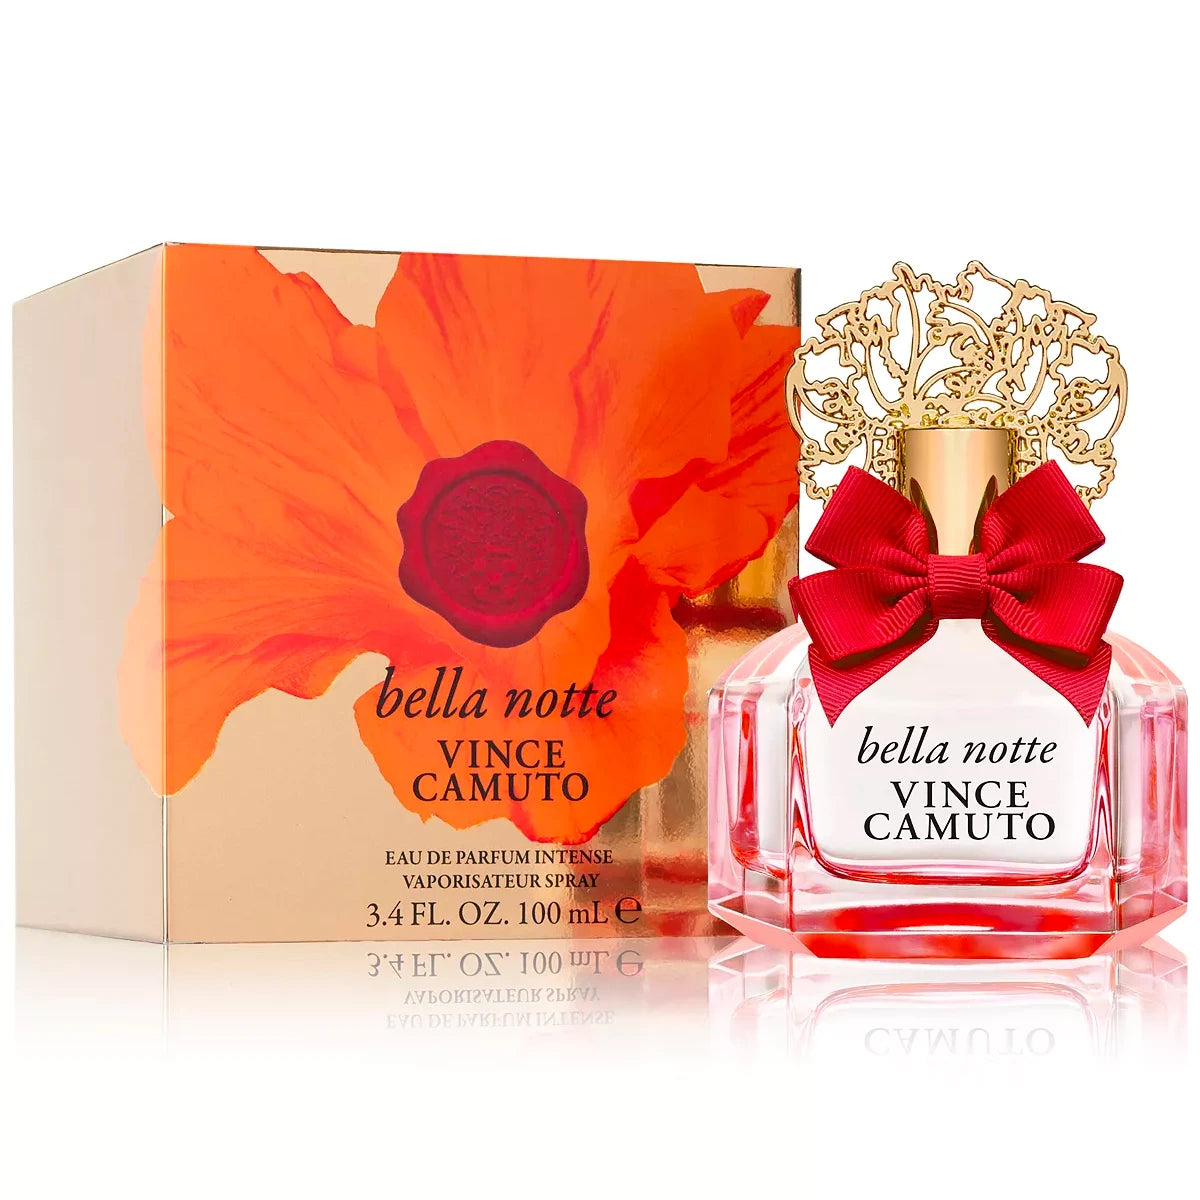 <p>Immerse yourself in the enchanting atmosphere of a luxurious evening garden with our exquisite Bella Notte Vince Camuto 3.4 oz EDP for Women. Bursting with fresh blackberry and currant notes, enhanced by sweet rose and zesty orange, Bella Notte seductively reveals a warm, earthy heart of patchouli, caramel and creamy sandalwood. A mesmerizing, feminine scent that captures the alluring mystery of the night.</p>
<h5 class="font-medium" _ngcontent-ng-c2966907514="" data-mce-fragment="1"> <br data-mce-fragment="1">
</h5>